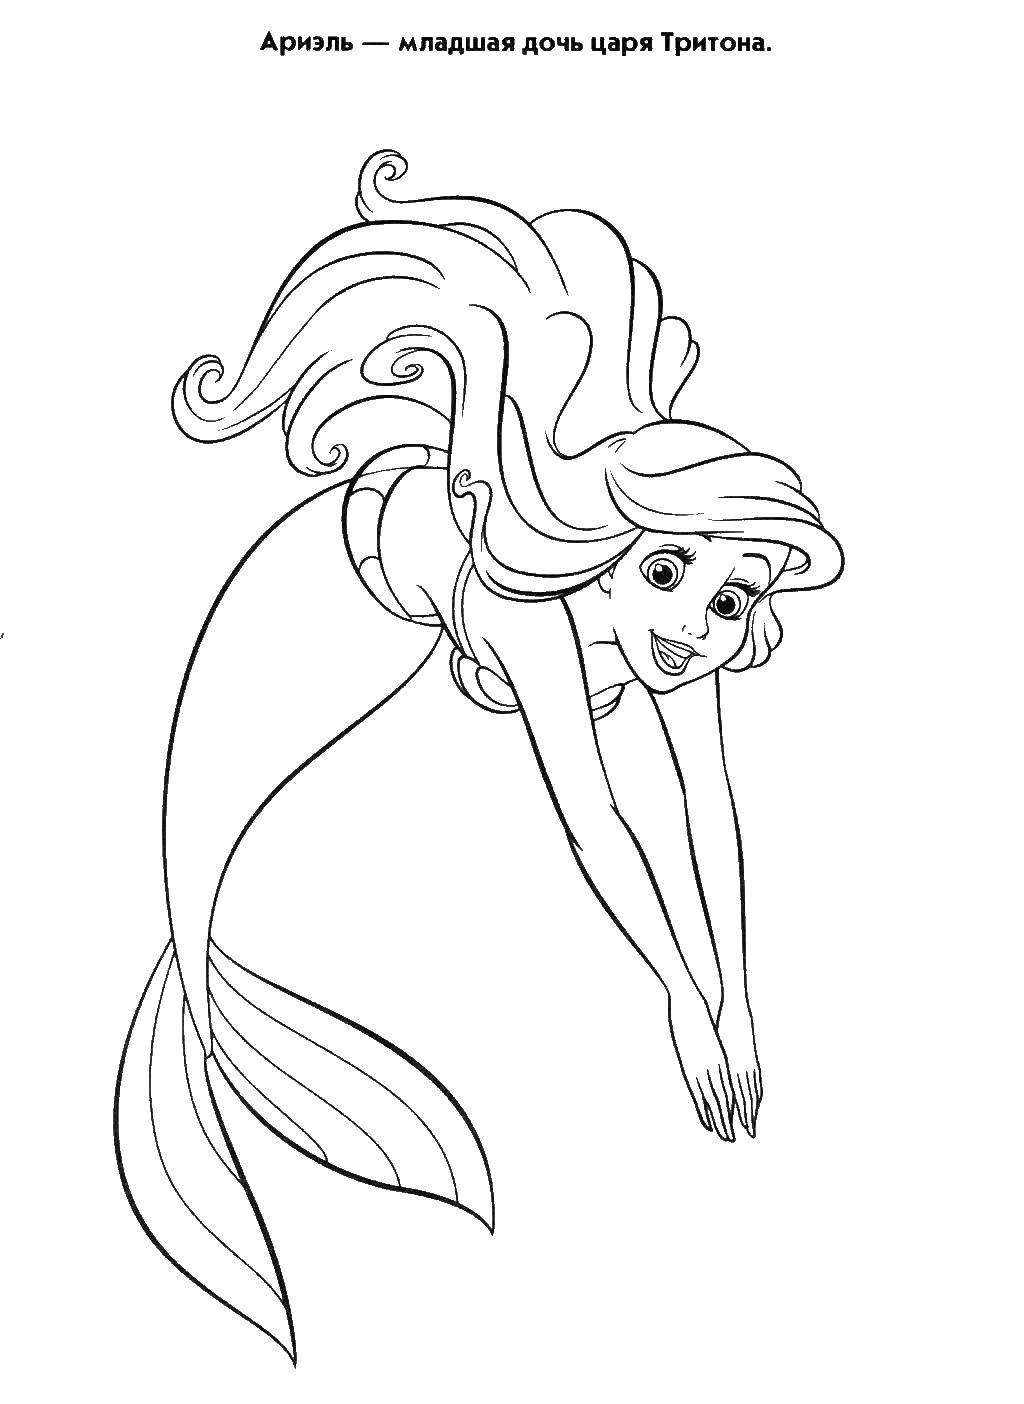 Coloring The little mermaid Ariel. Category the little mermaid Ariel. Tags:  Ariel, mermaid.